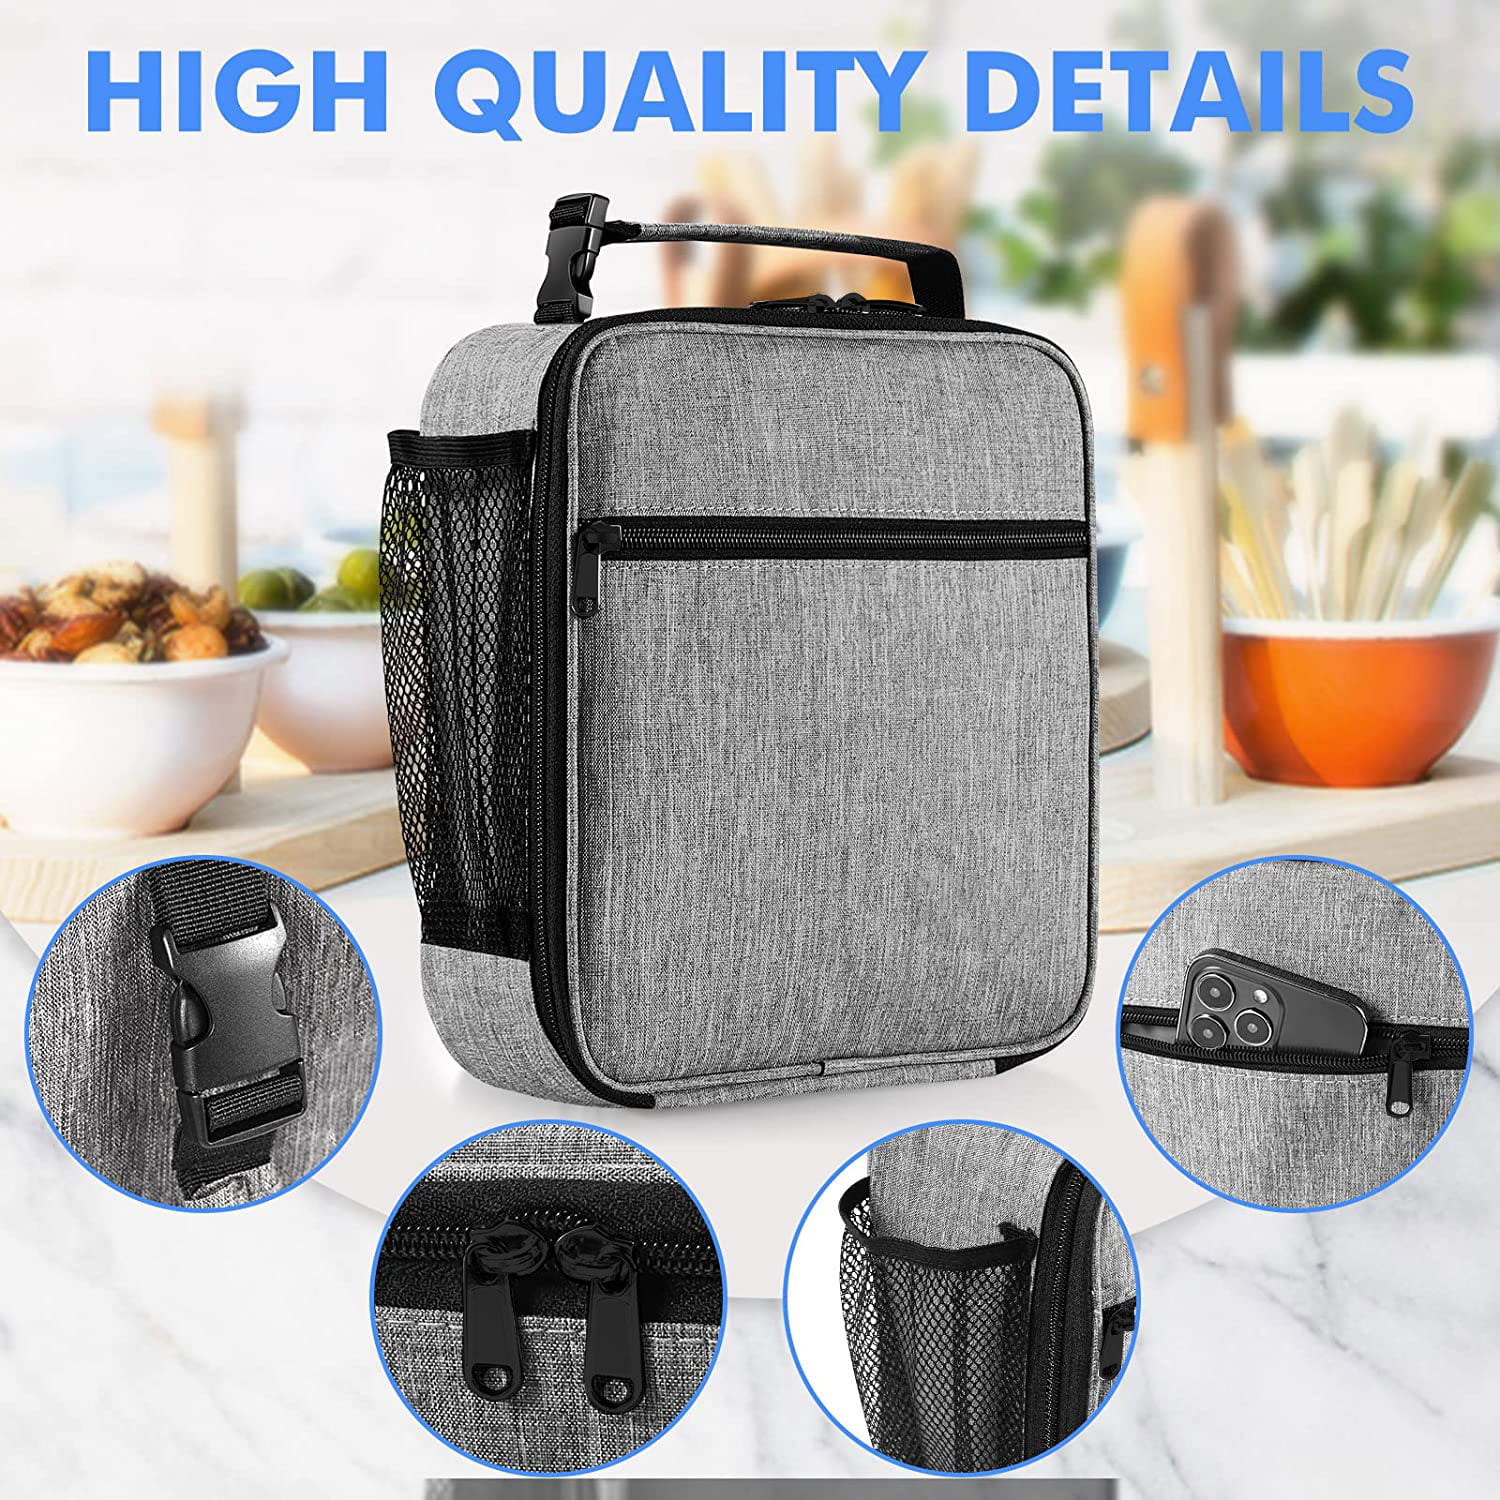 Kuber Industries Insulated Lunch Box For Kids & Adults|Premium Food-Grade  PP Plastic|Leakproof & Spill Proof|Dishwasher & Microwave Safe Lunch